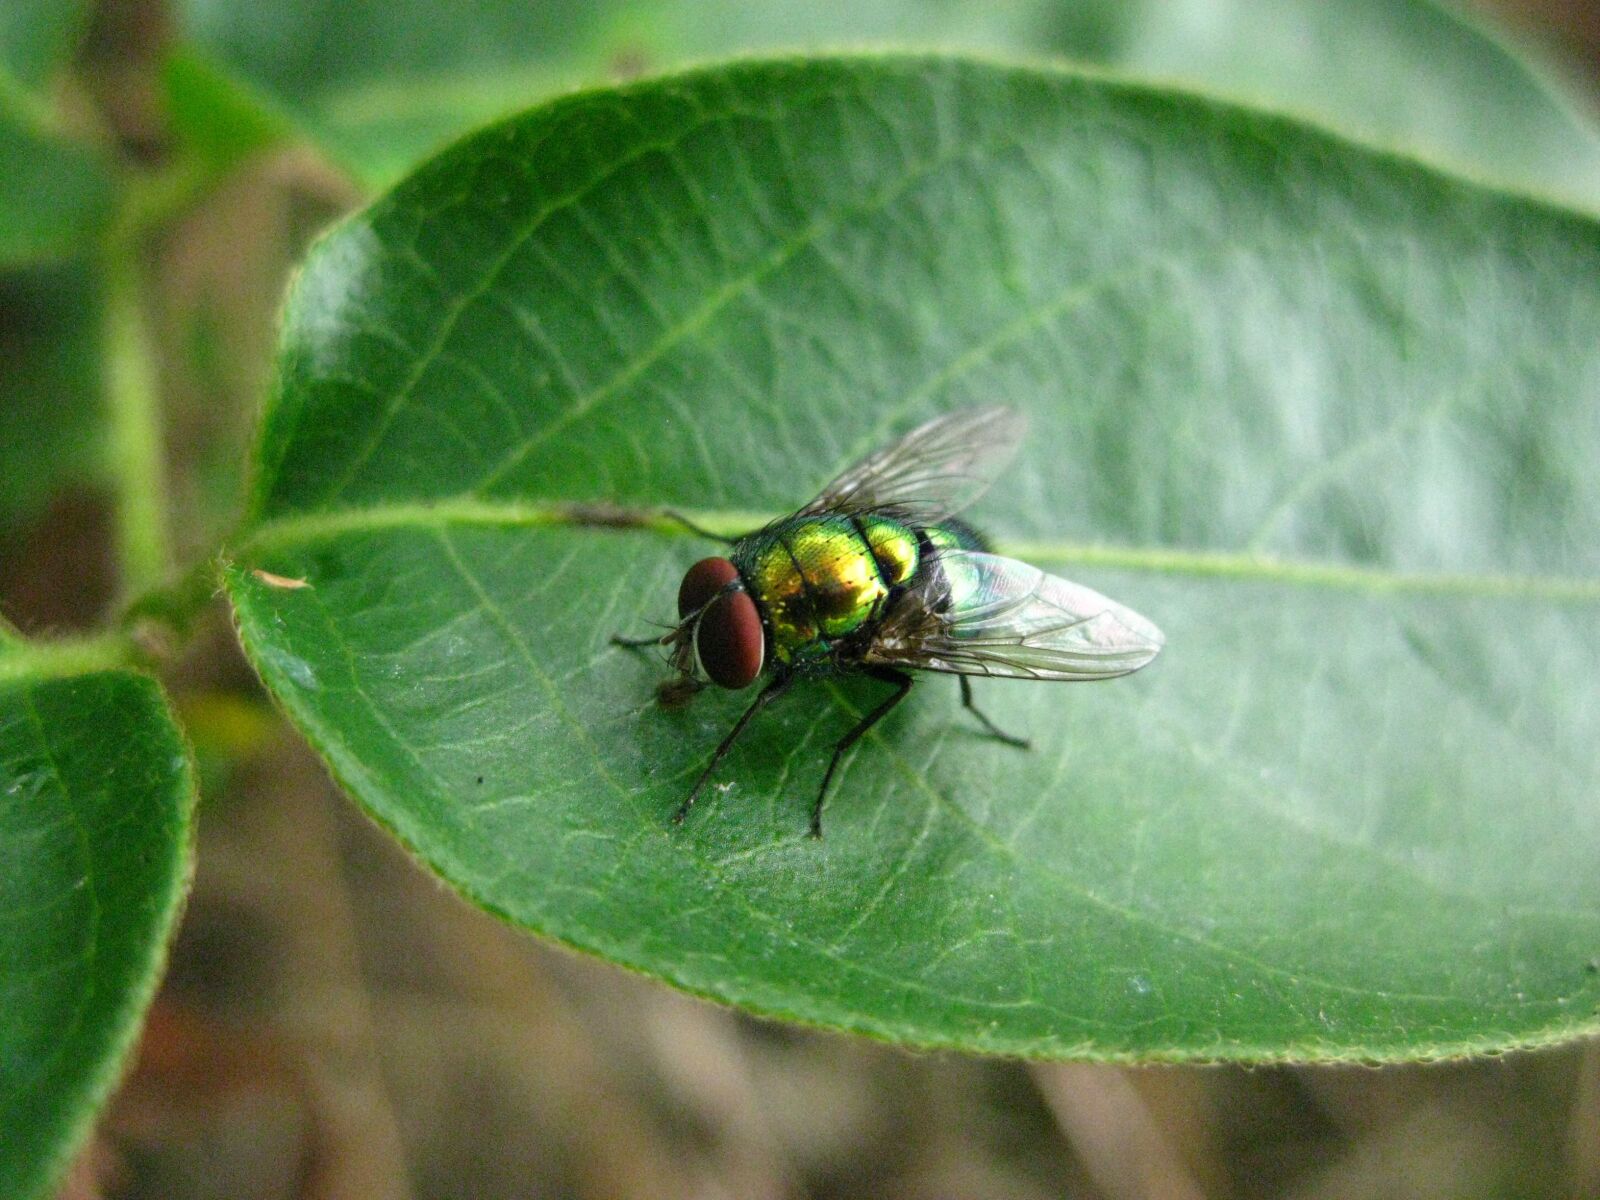 Canon PowerShot SD1100 IS (Digital IXUS 80 IS / IXY Digital 20 IS) sample photo. Nature, insect, pest photography